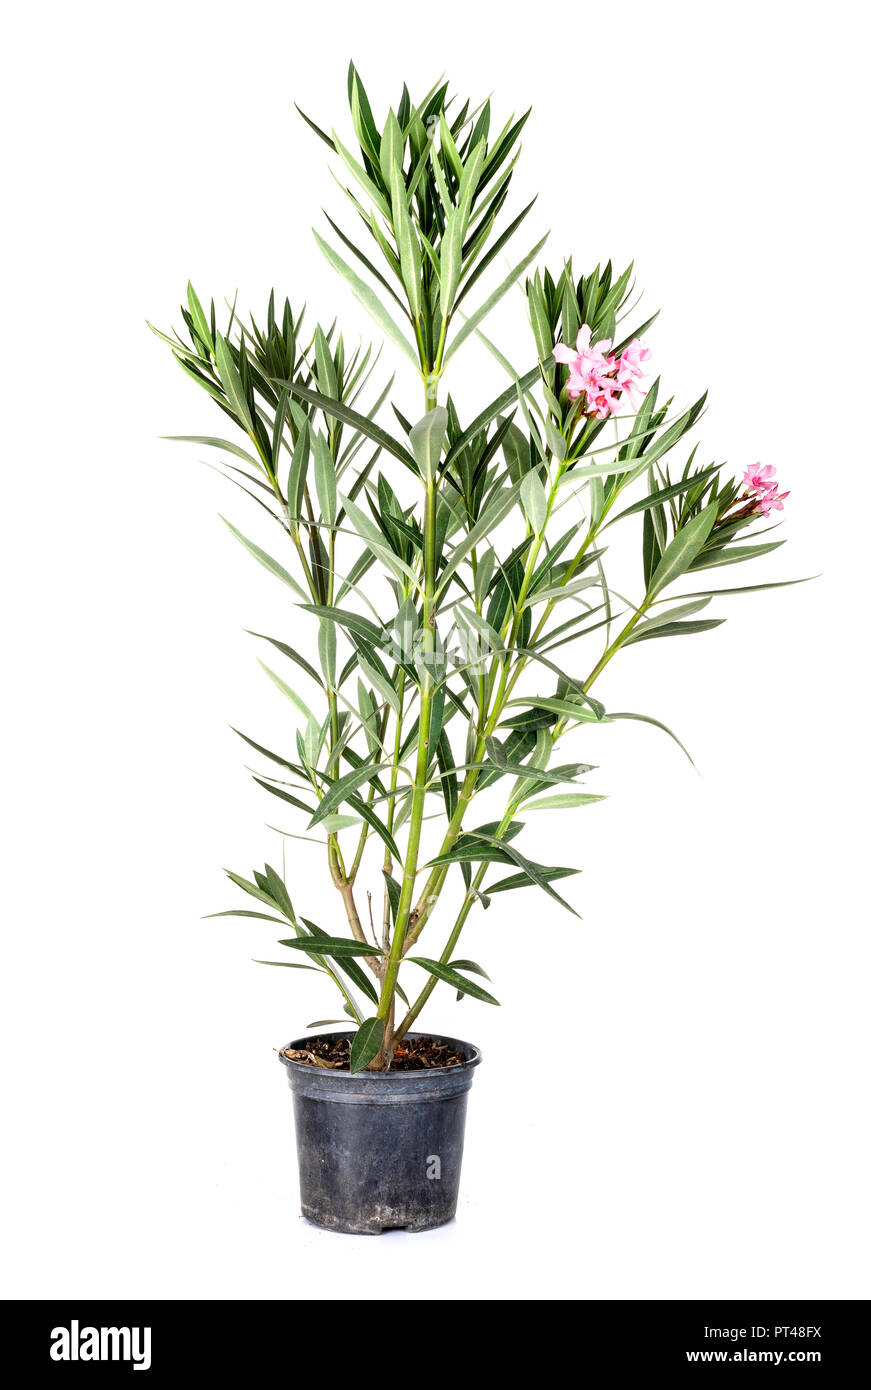 Nerium oleander plant in front of white background Stock Photo - Alamy